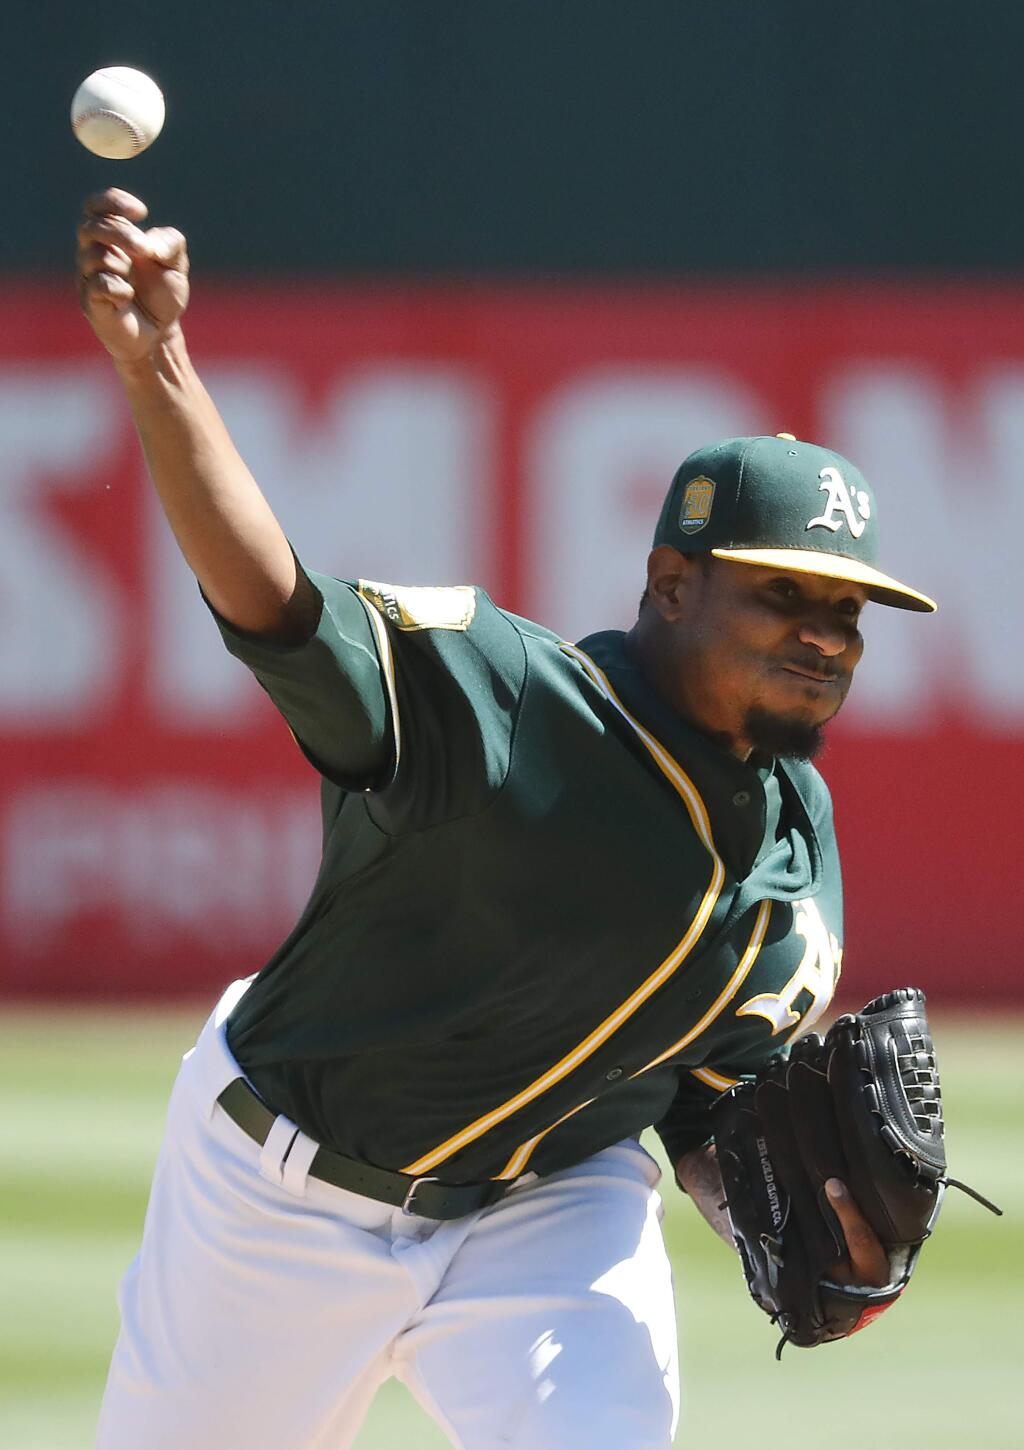 Oakland Athletics starting pitcher Edwin Jackson (37) throws against the Los Angeles Angels during the first inning of a baseball game in Oakland, Calif., Thursday, Sept. 20, 2018. (AP Photo/Tony Avelar)